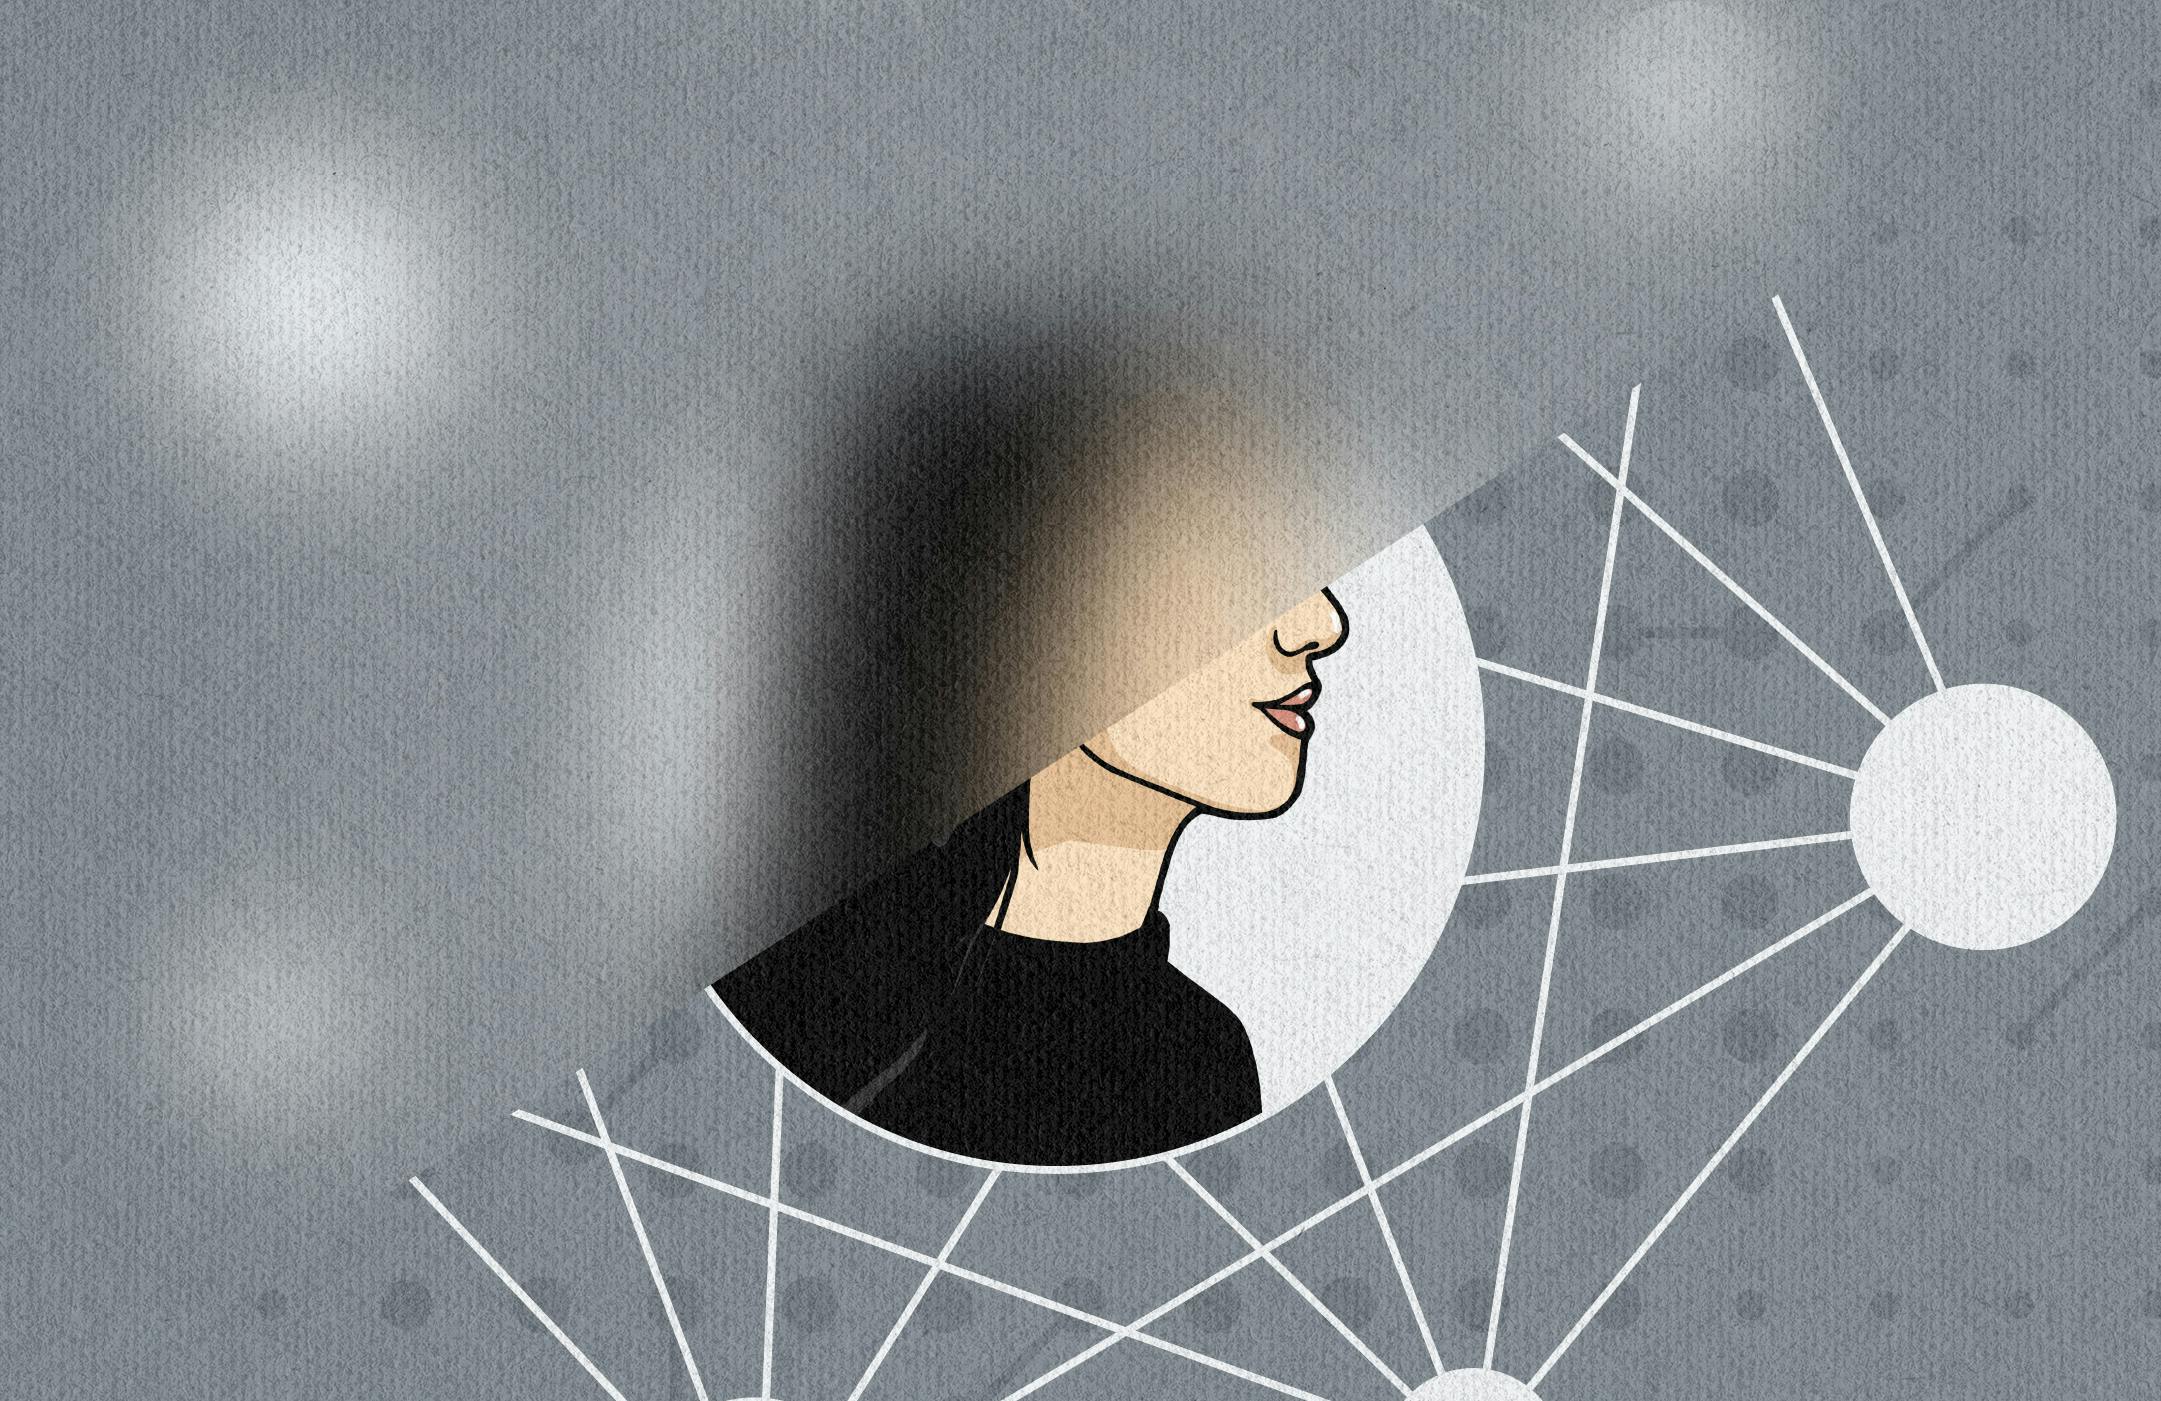 Illustration of woman's profile in the center of a cluster graph, with a slant across the middle blurring the top-left half of the image.